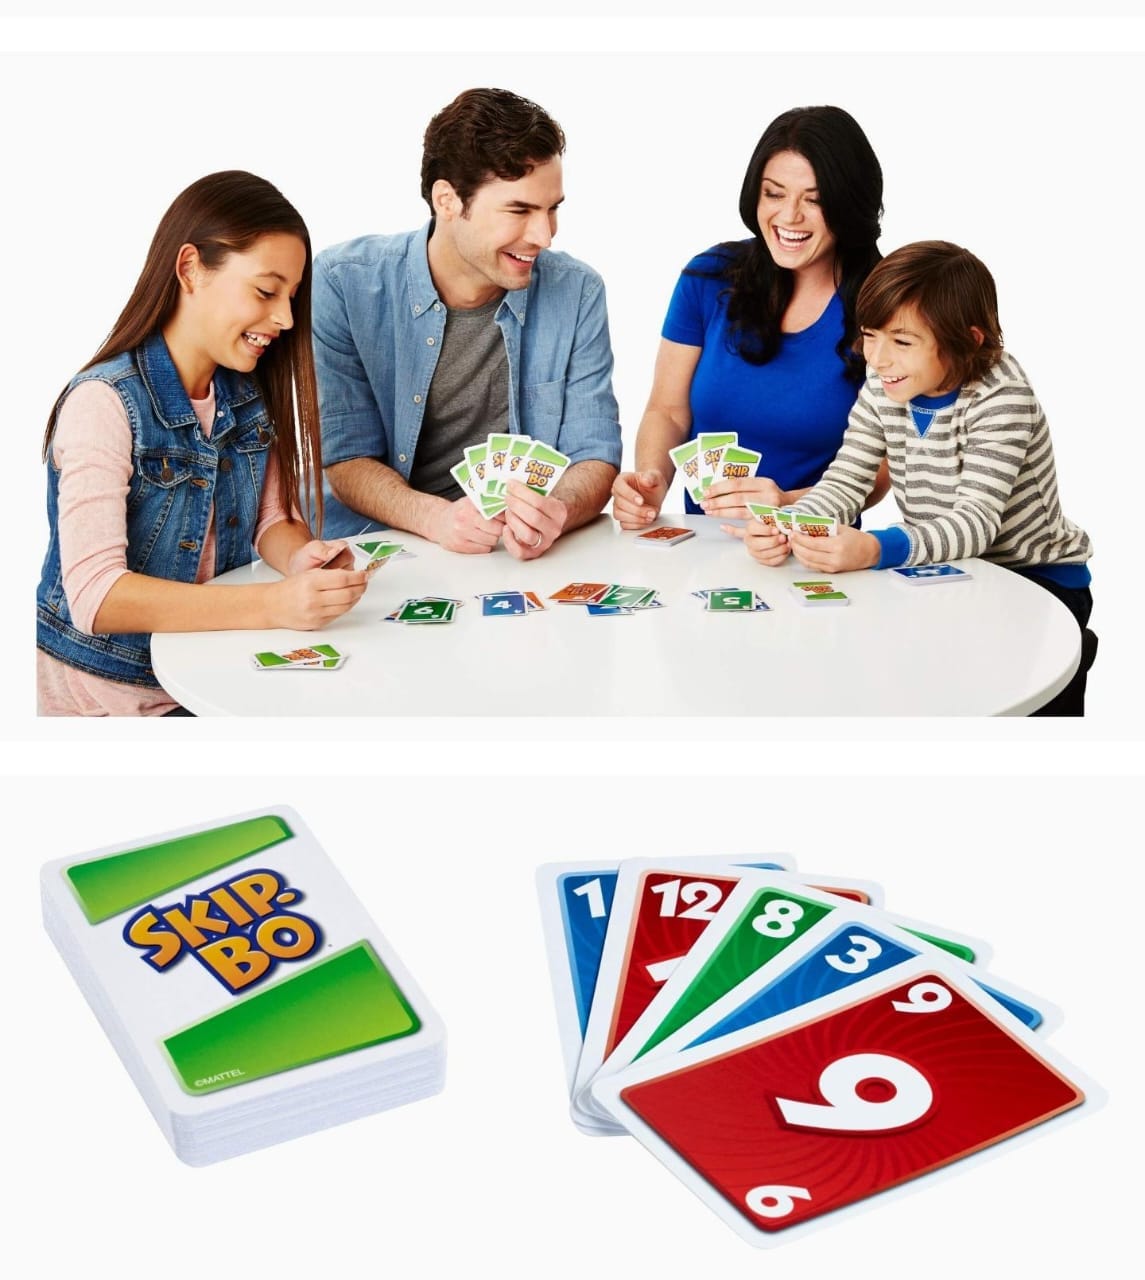 monopoly plastic Skip-Bo Card Game , Games and puzzles, fun timw ith family friends- pack of 1